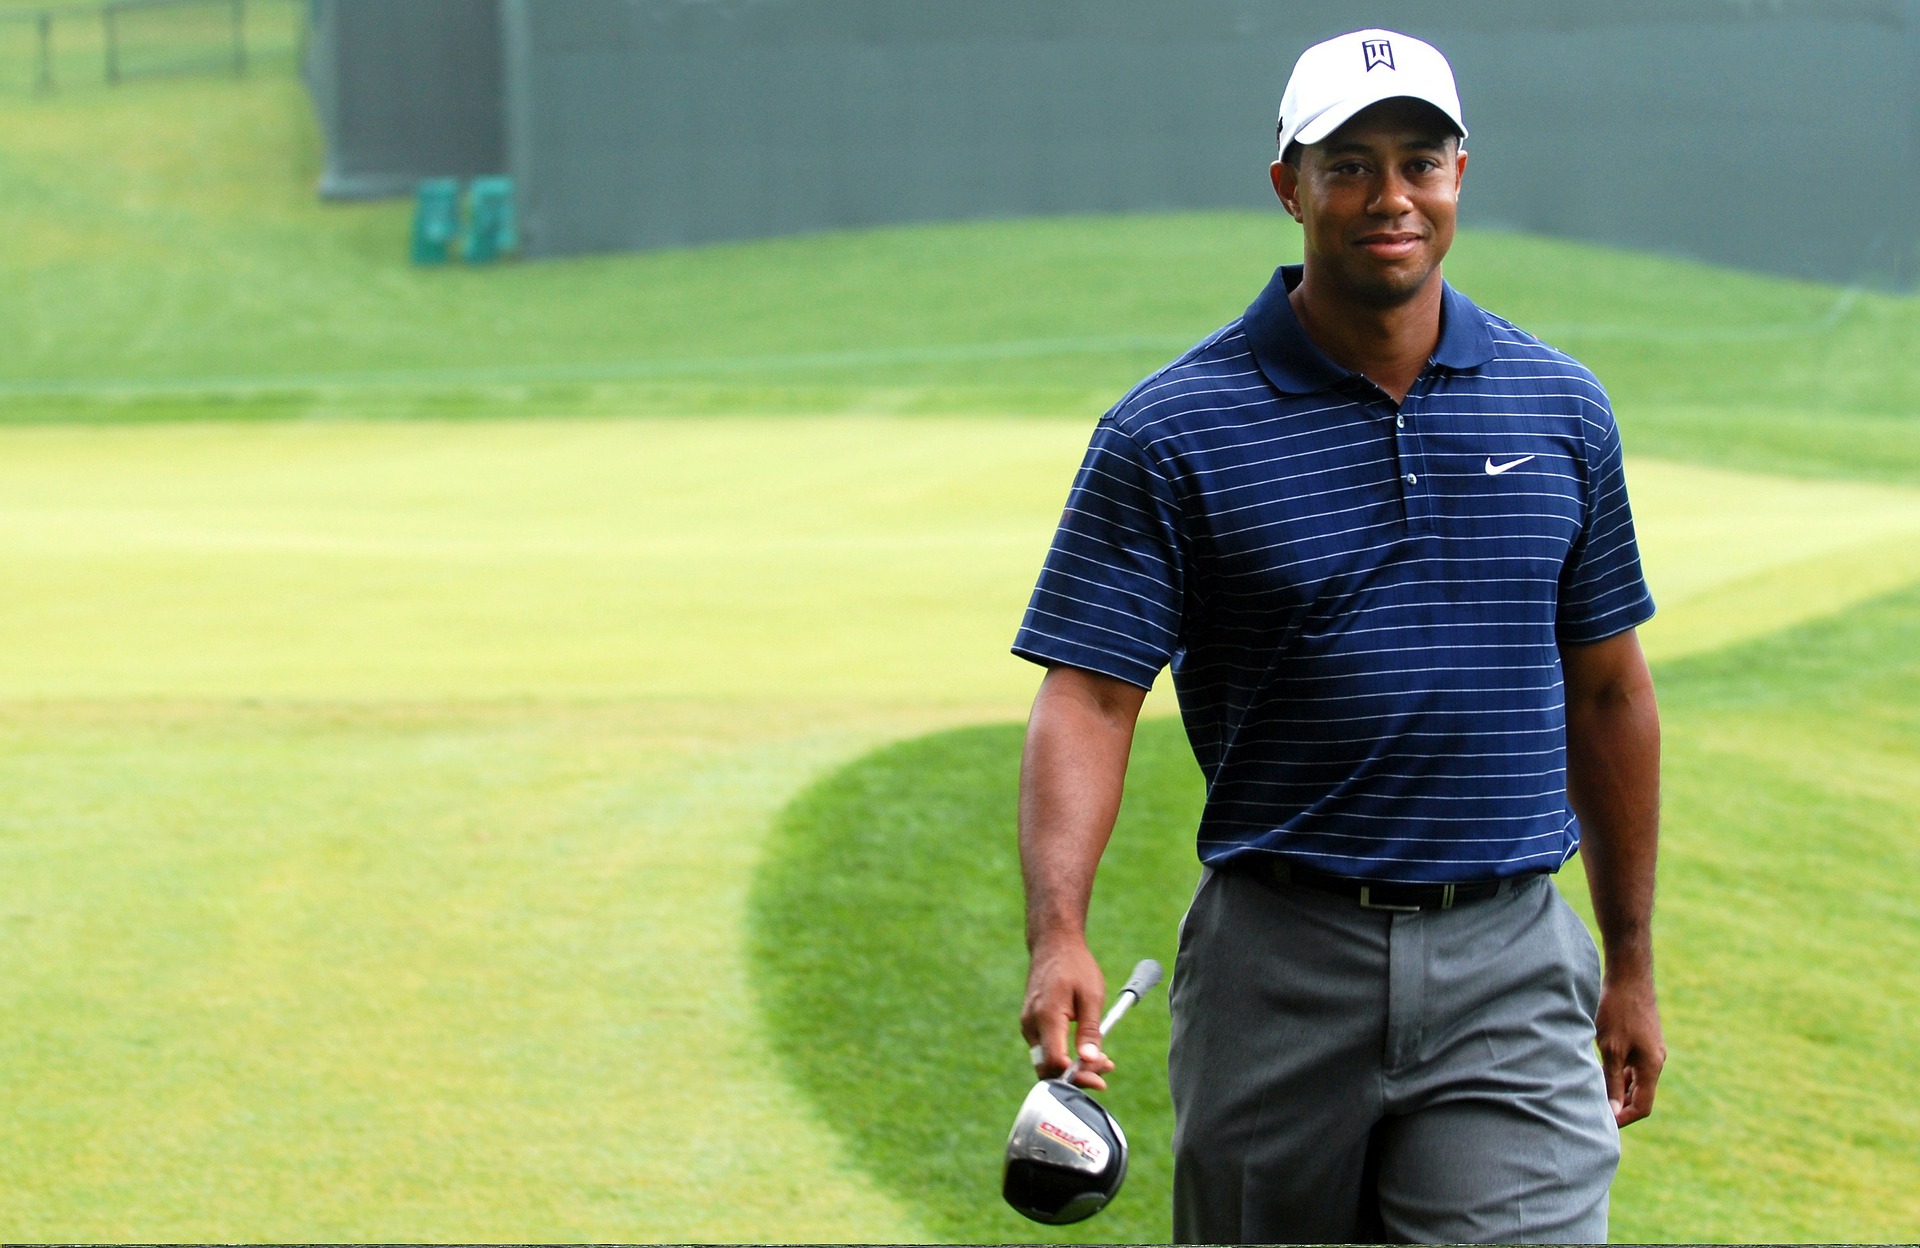 Tiger Woods sets eye on record breaking 83rd PGA victory